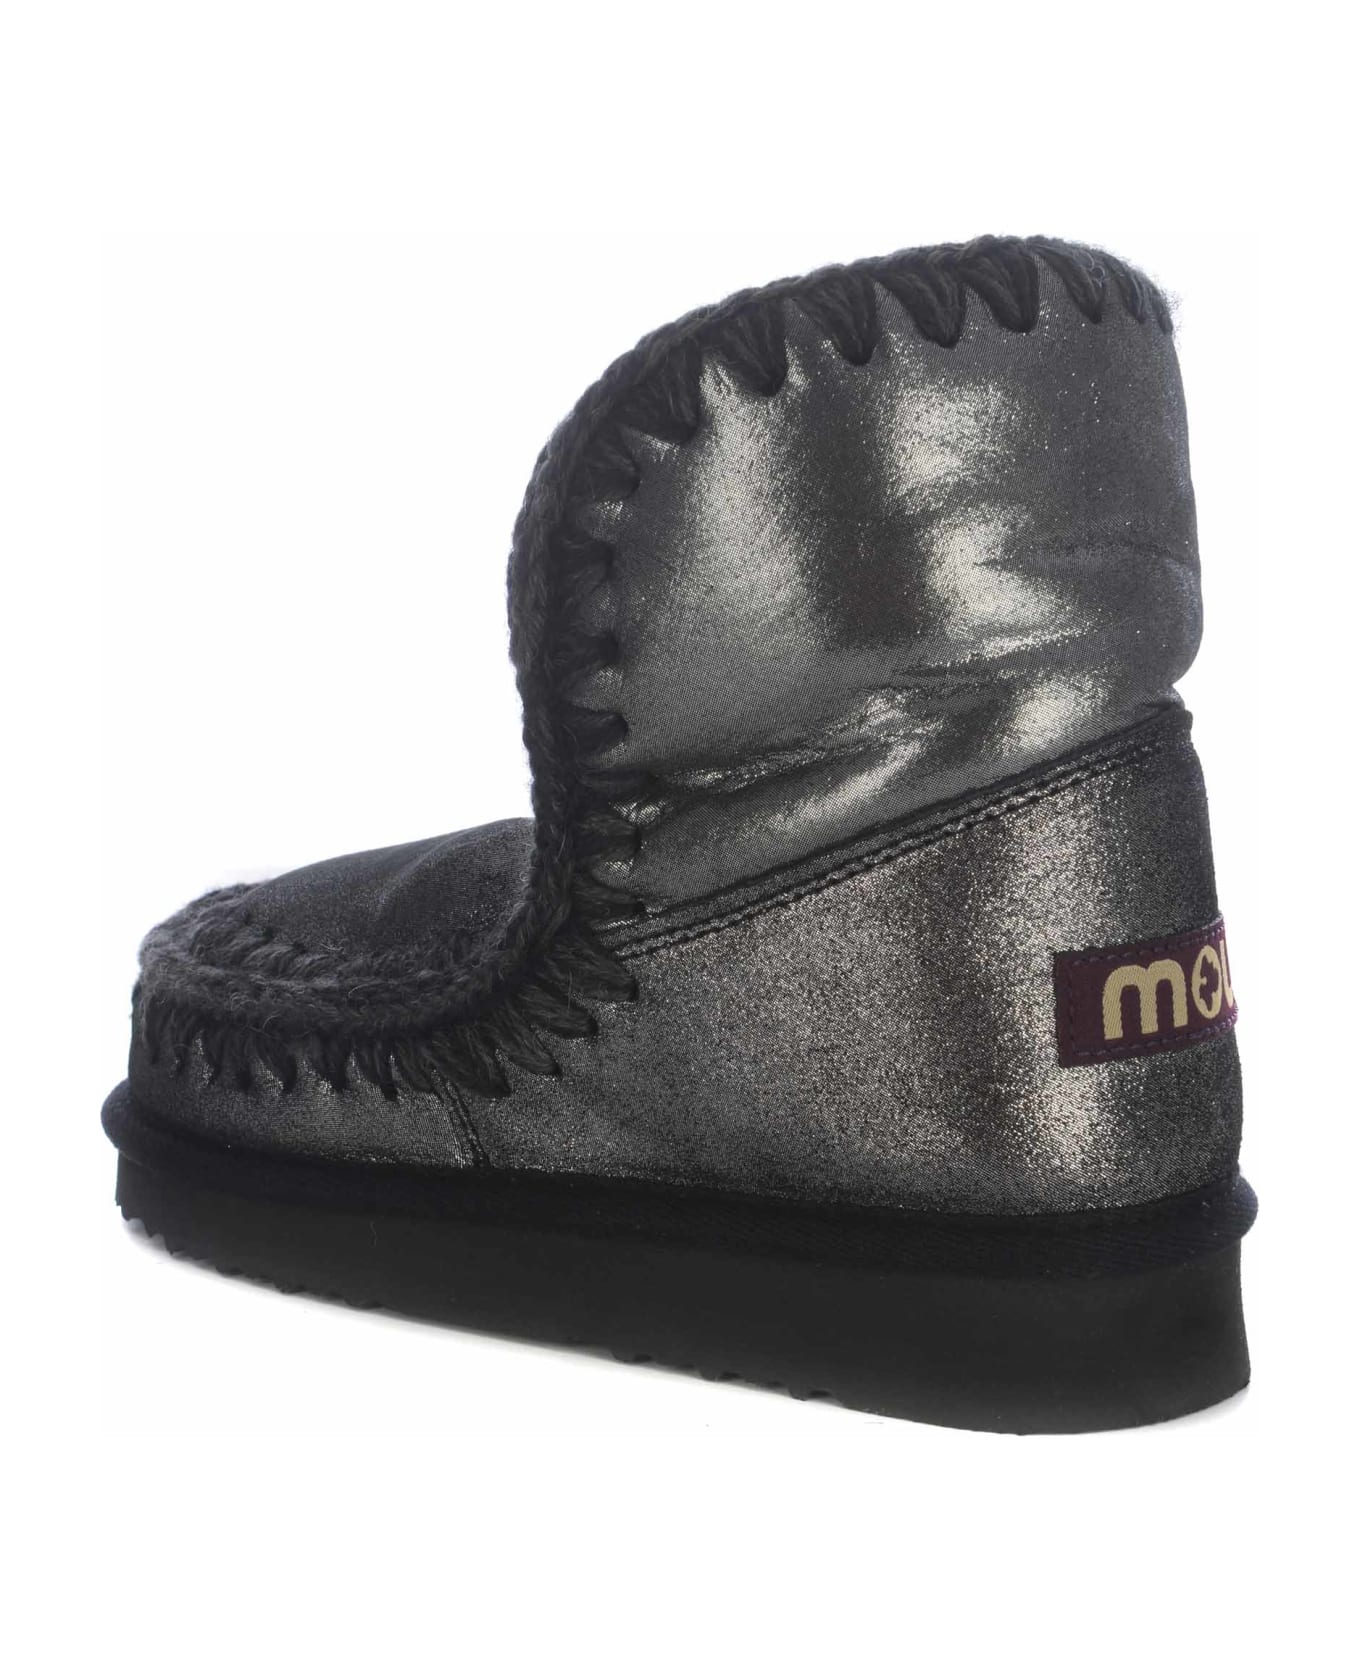 Mou Ankle Boots Mou "eskimo18" Made Of Leather - Piombo